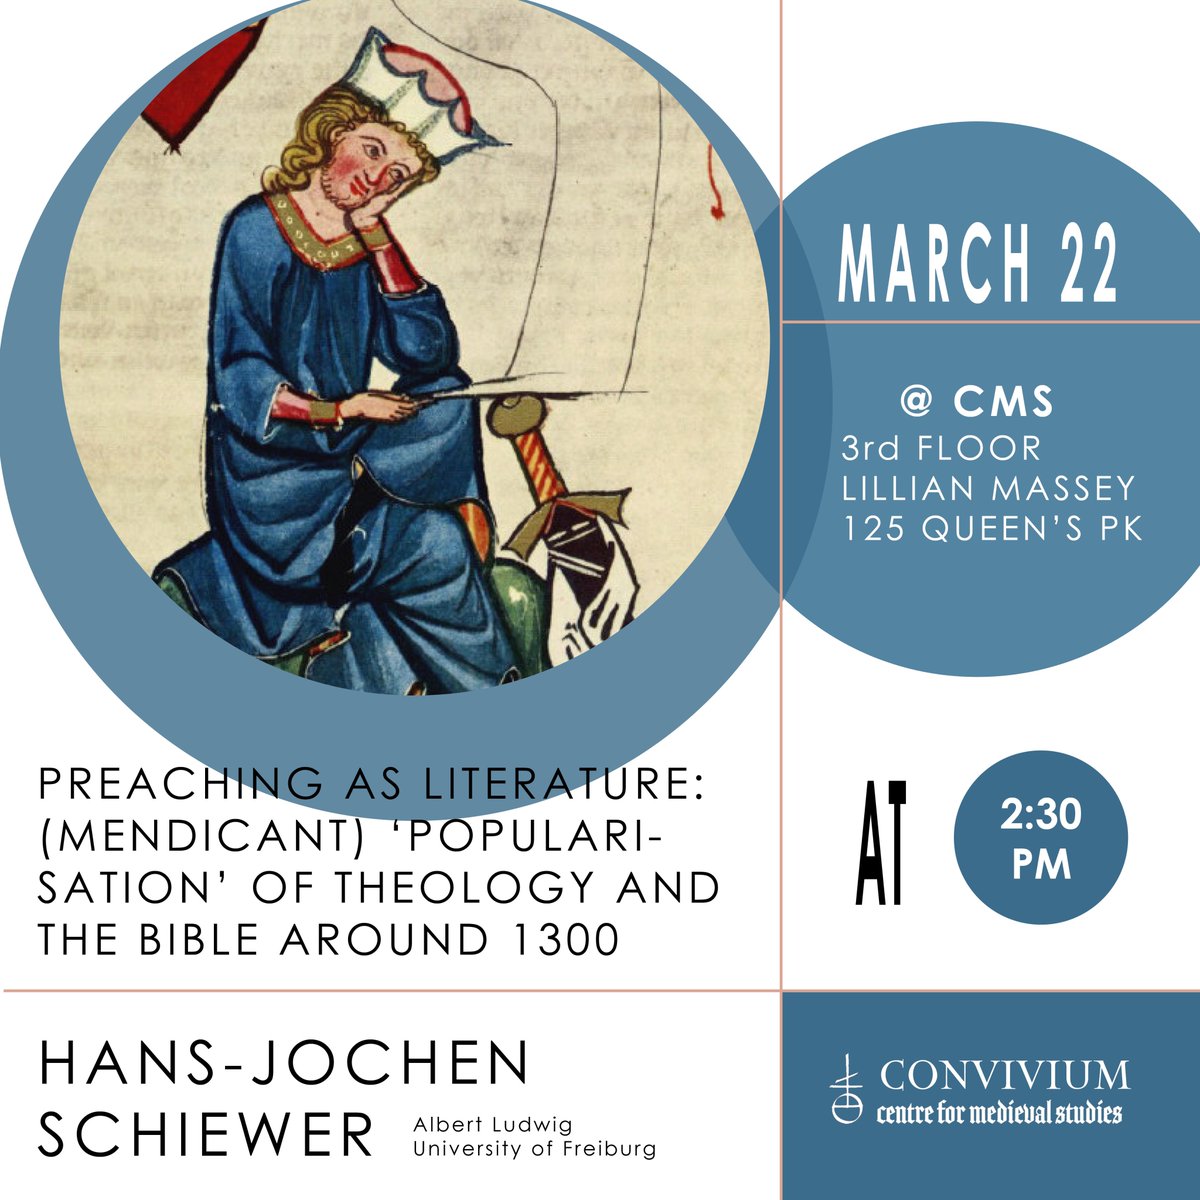 Hosted by Markus Stock, @UofTCMS welcomes Hans-Jochen Schiewer of @UniFreiburg on 'Preaching as Literature: (Mendicant) ‘Popularization’ of Theology and the Bible around 1300' on March 22. RSVP to attend in person or via Zoom 👉 uoft.me/acQ